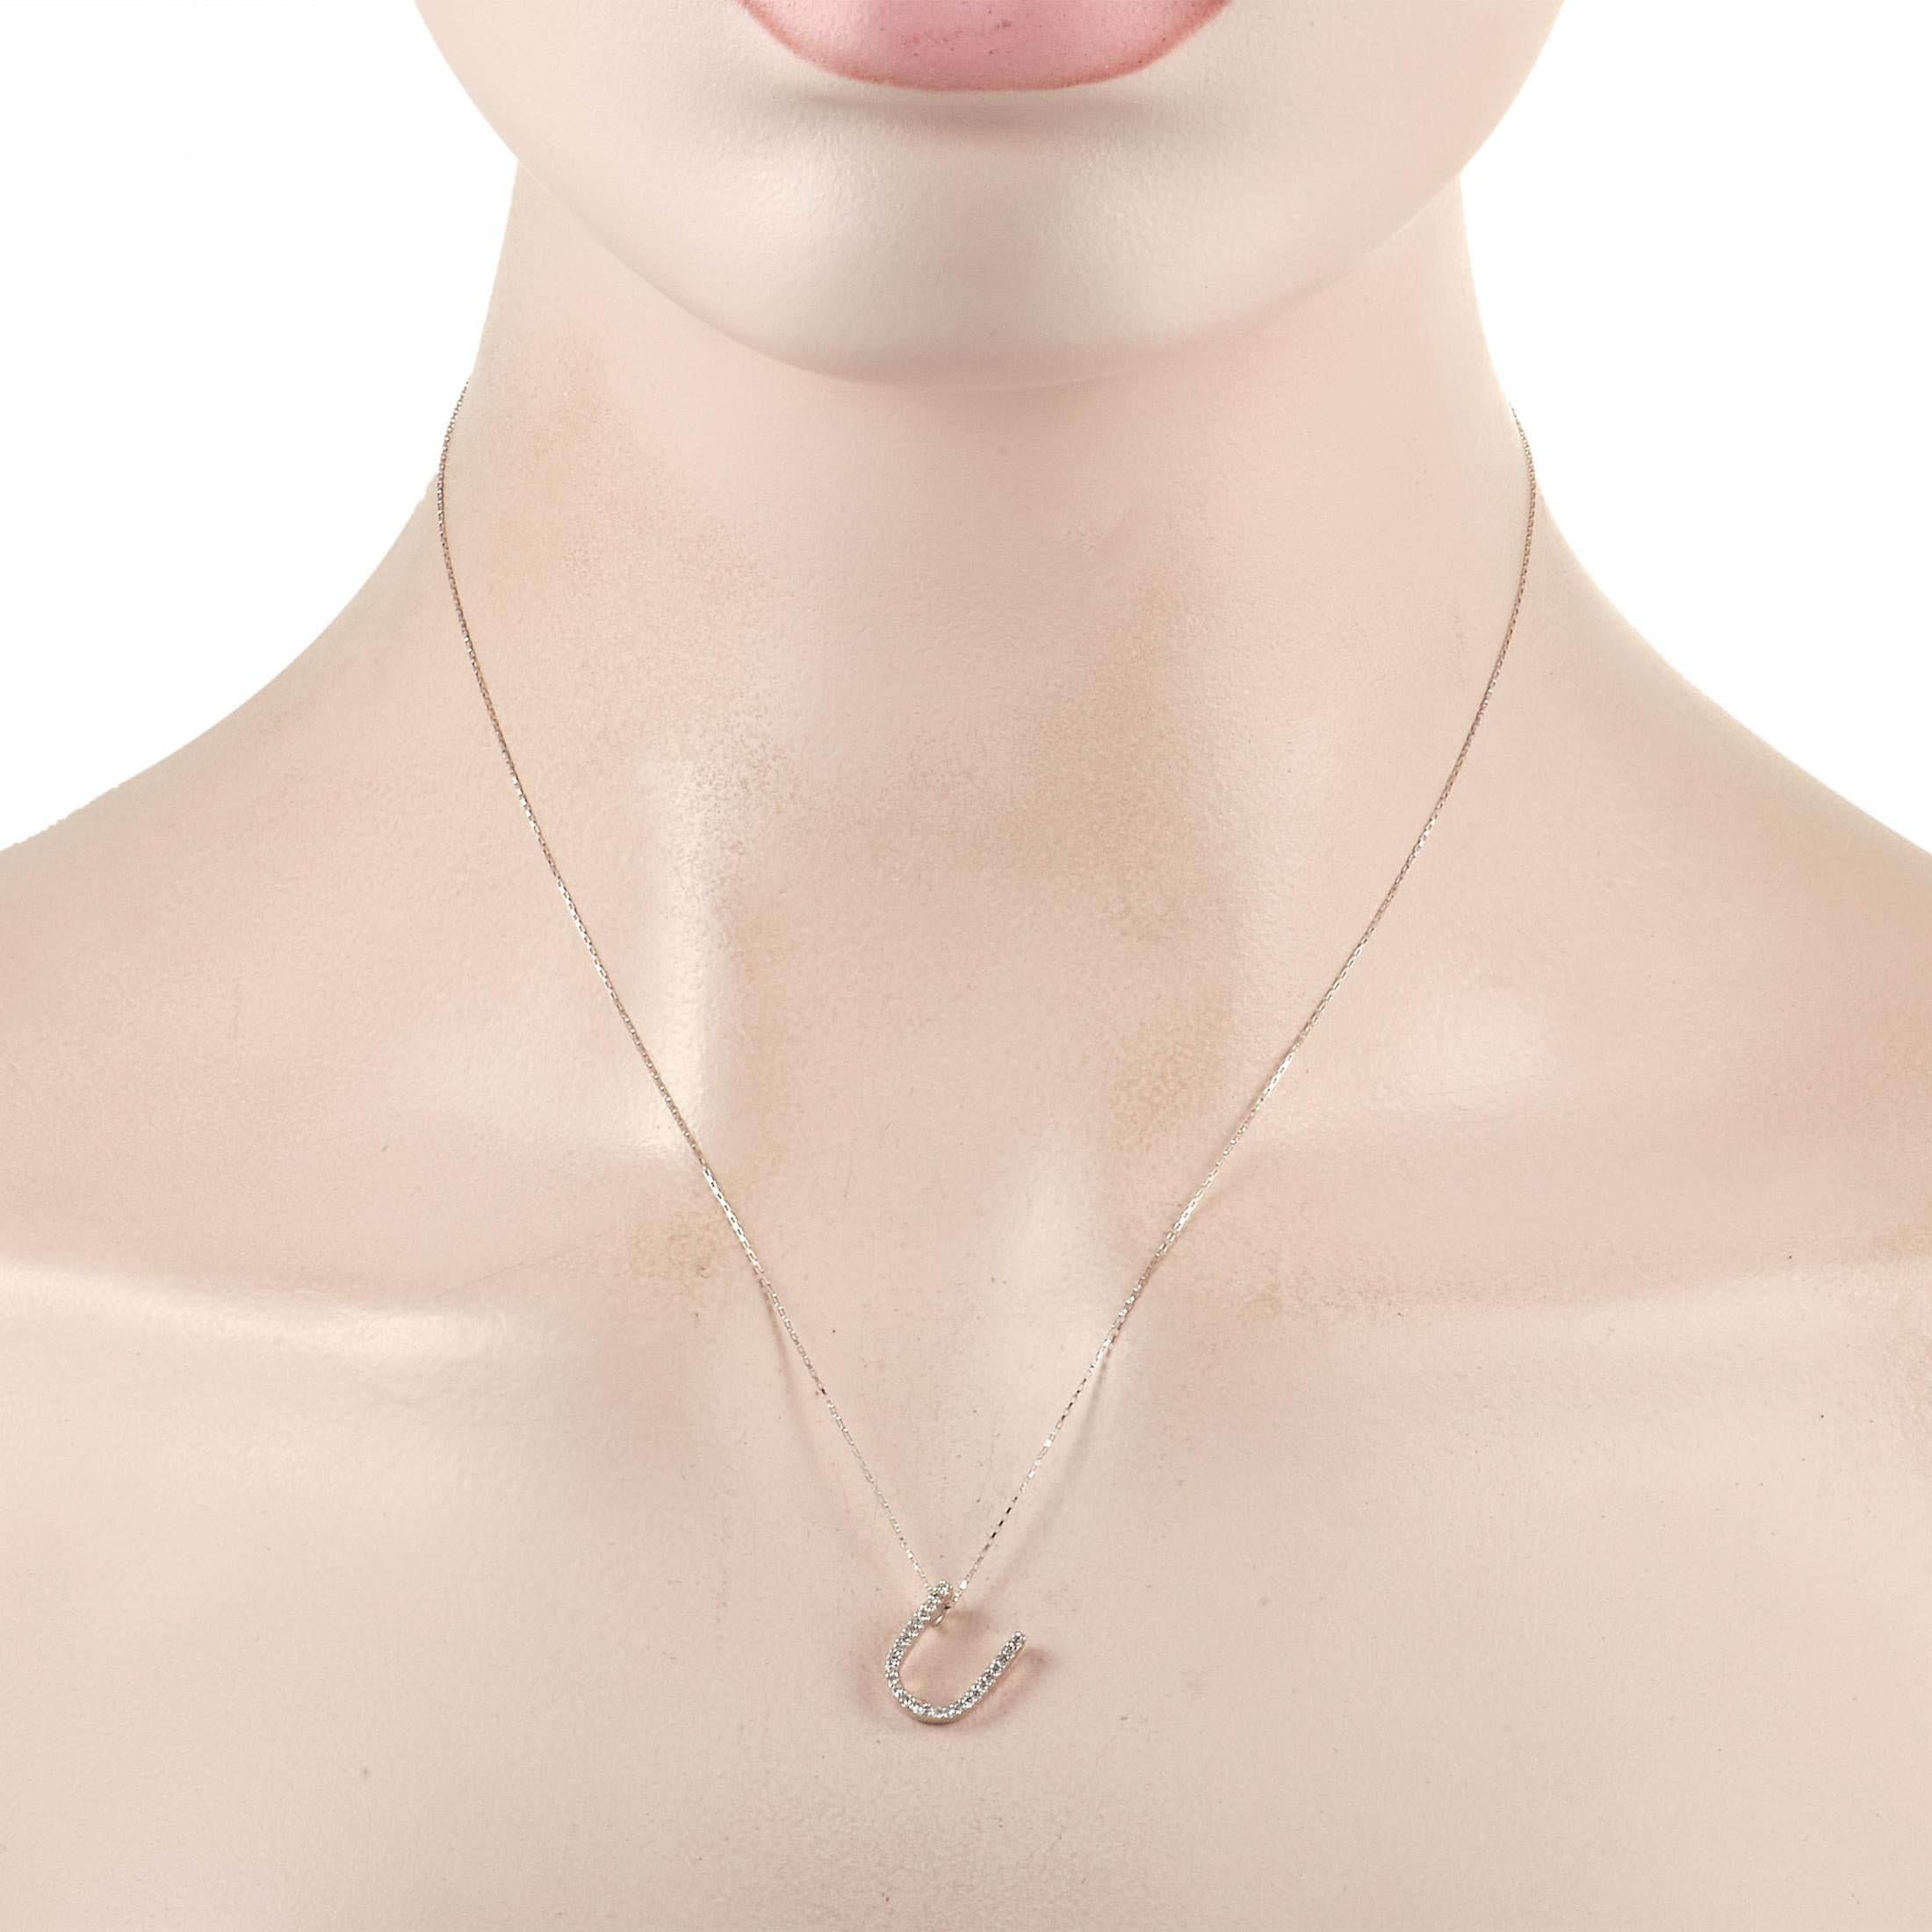 This 14K White Gold monogram necklace will never go out of style. Suspended from an 18” chain, you’ll find a stylish letter “U” shaped pendant that measures 0.5” long and 0.45” wide. Diamonds with a total weight of 0.17 carats also ensure this piece